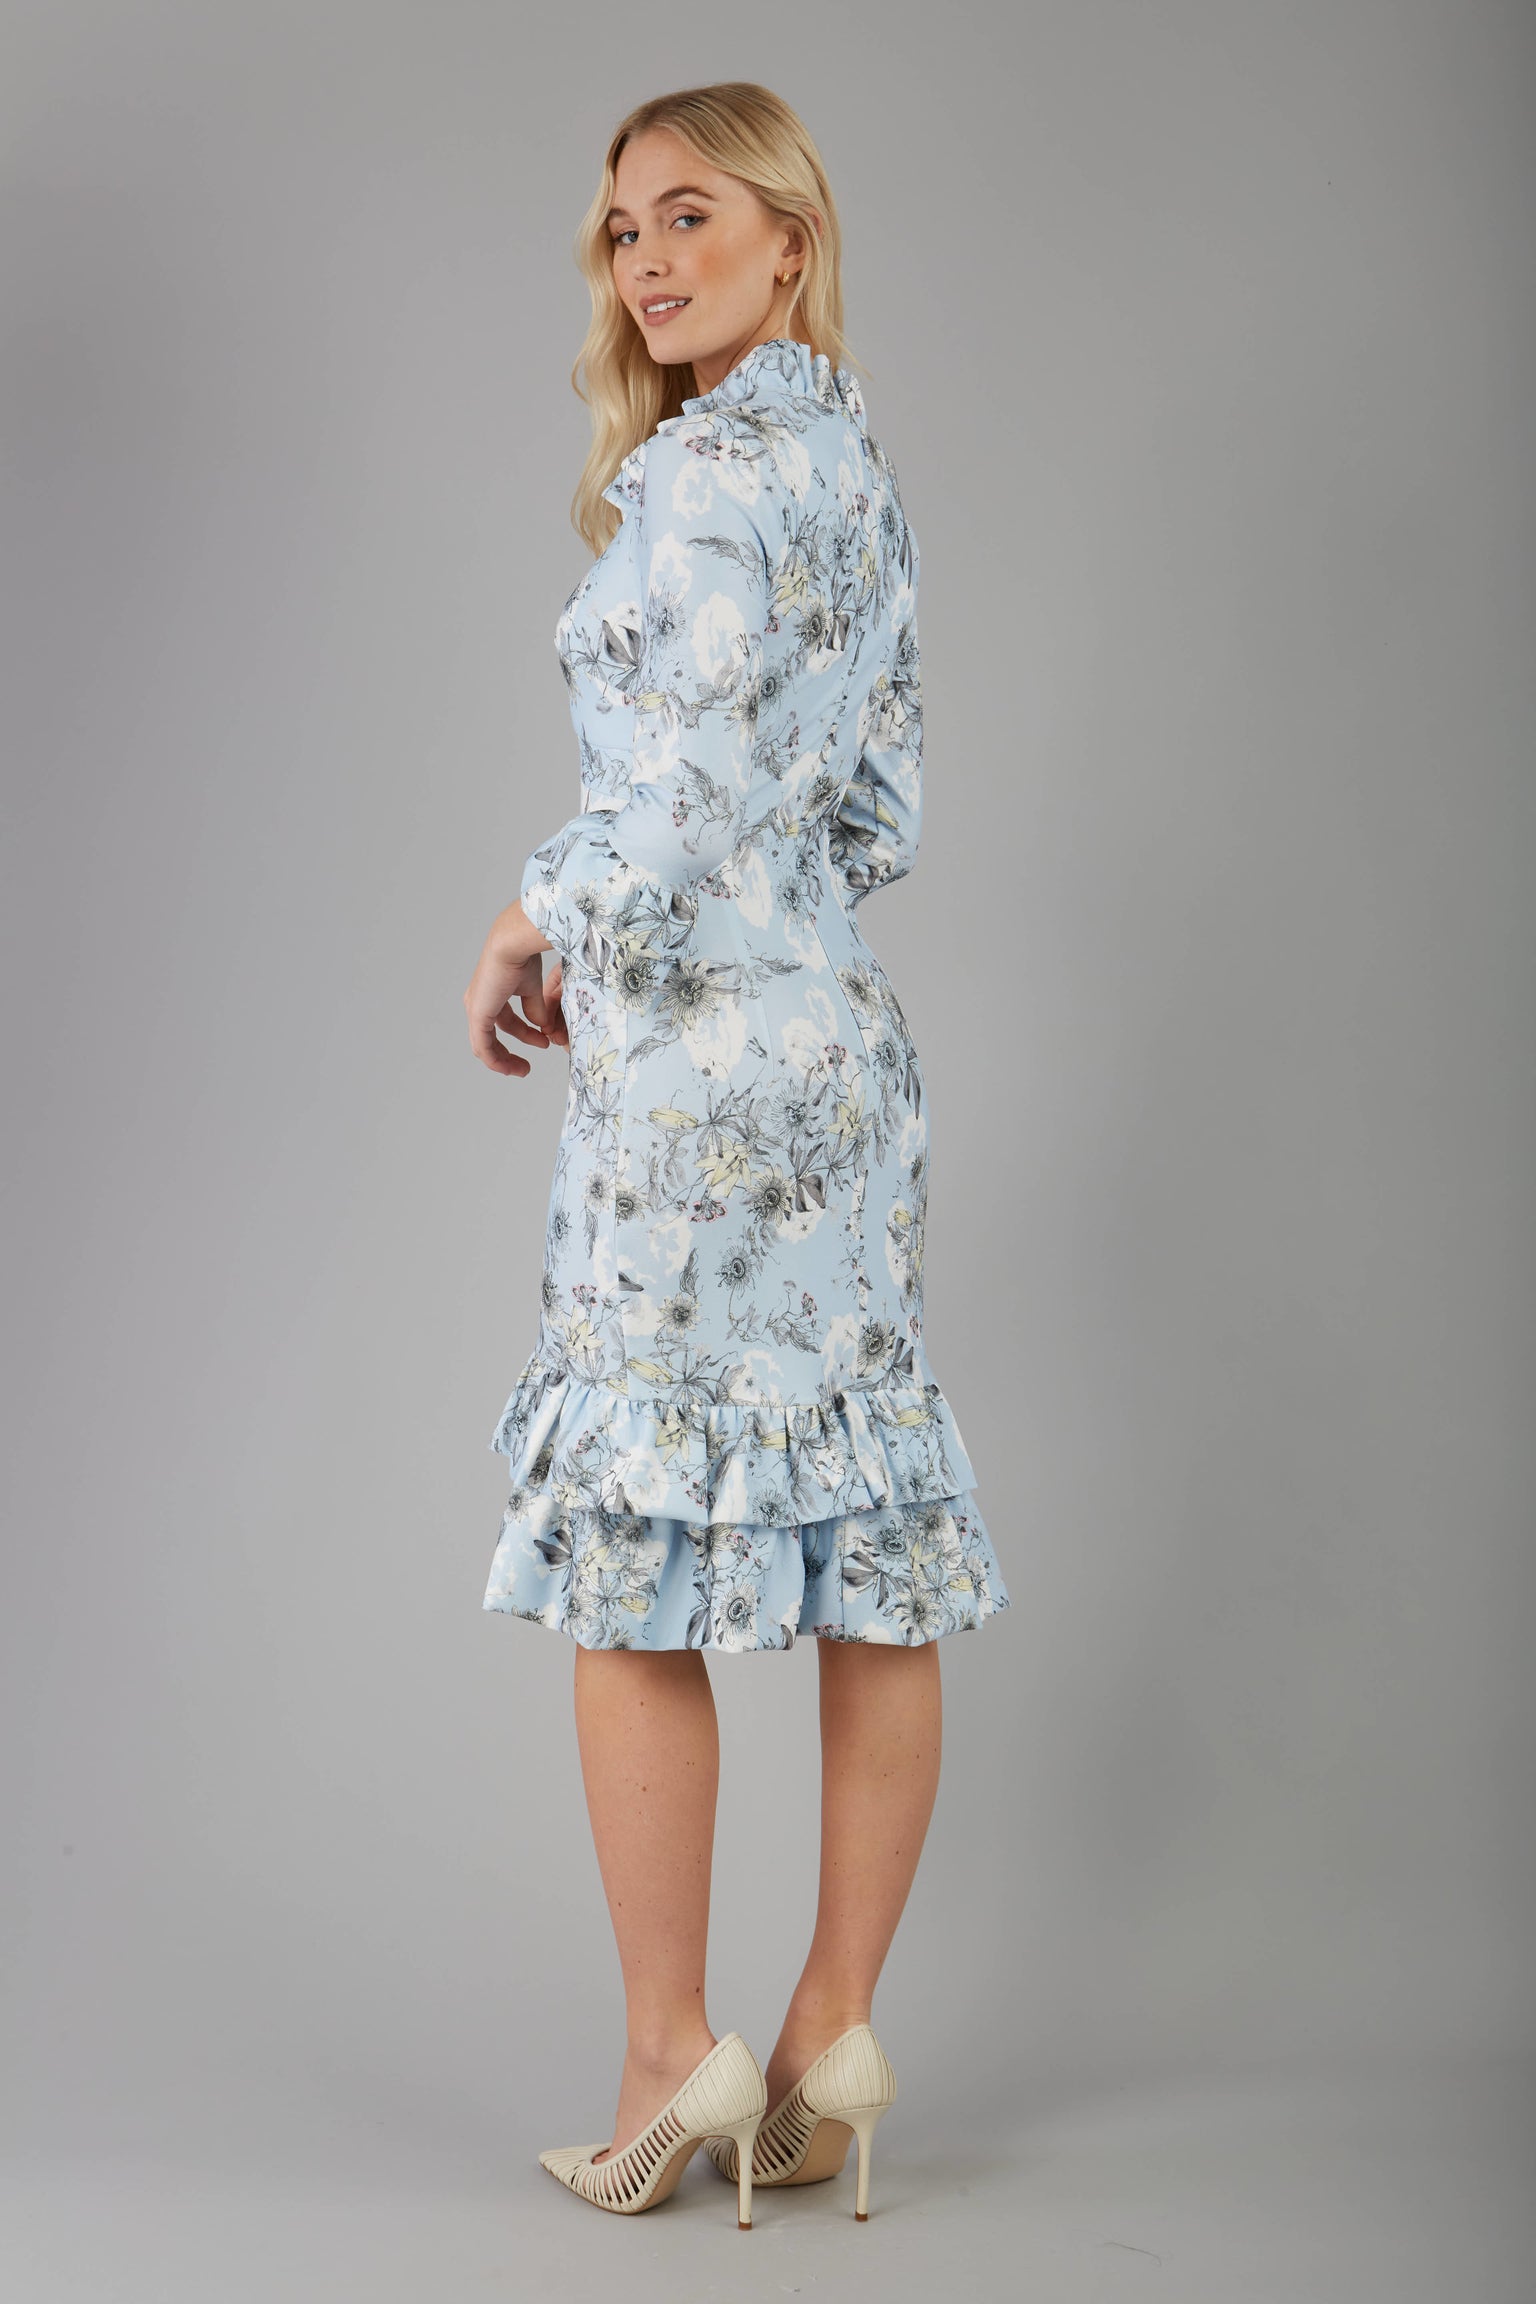 model is wearing diva catwalk fern printed dress with rushes and sleeves in light blue back